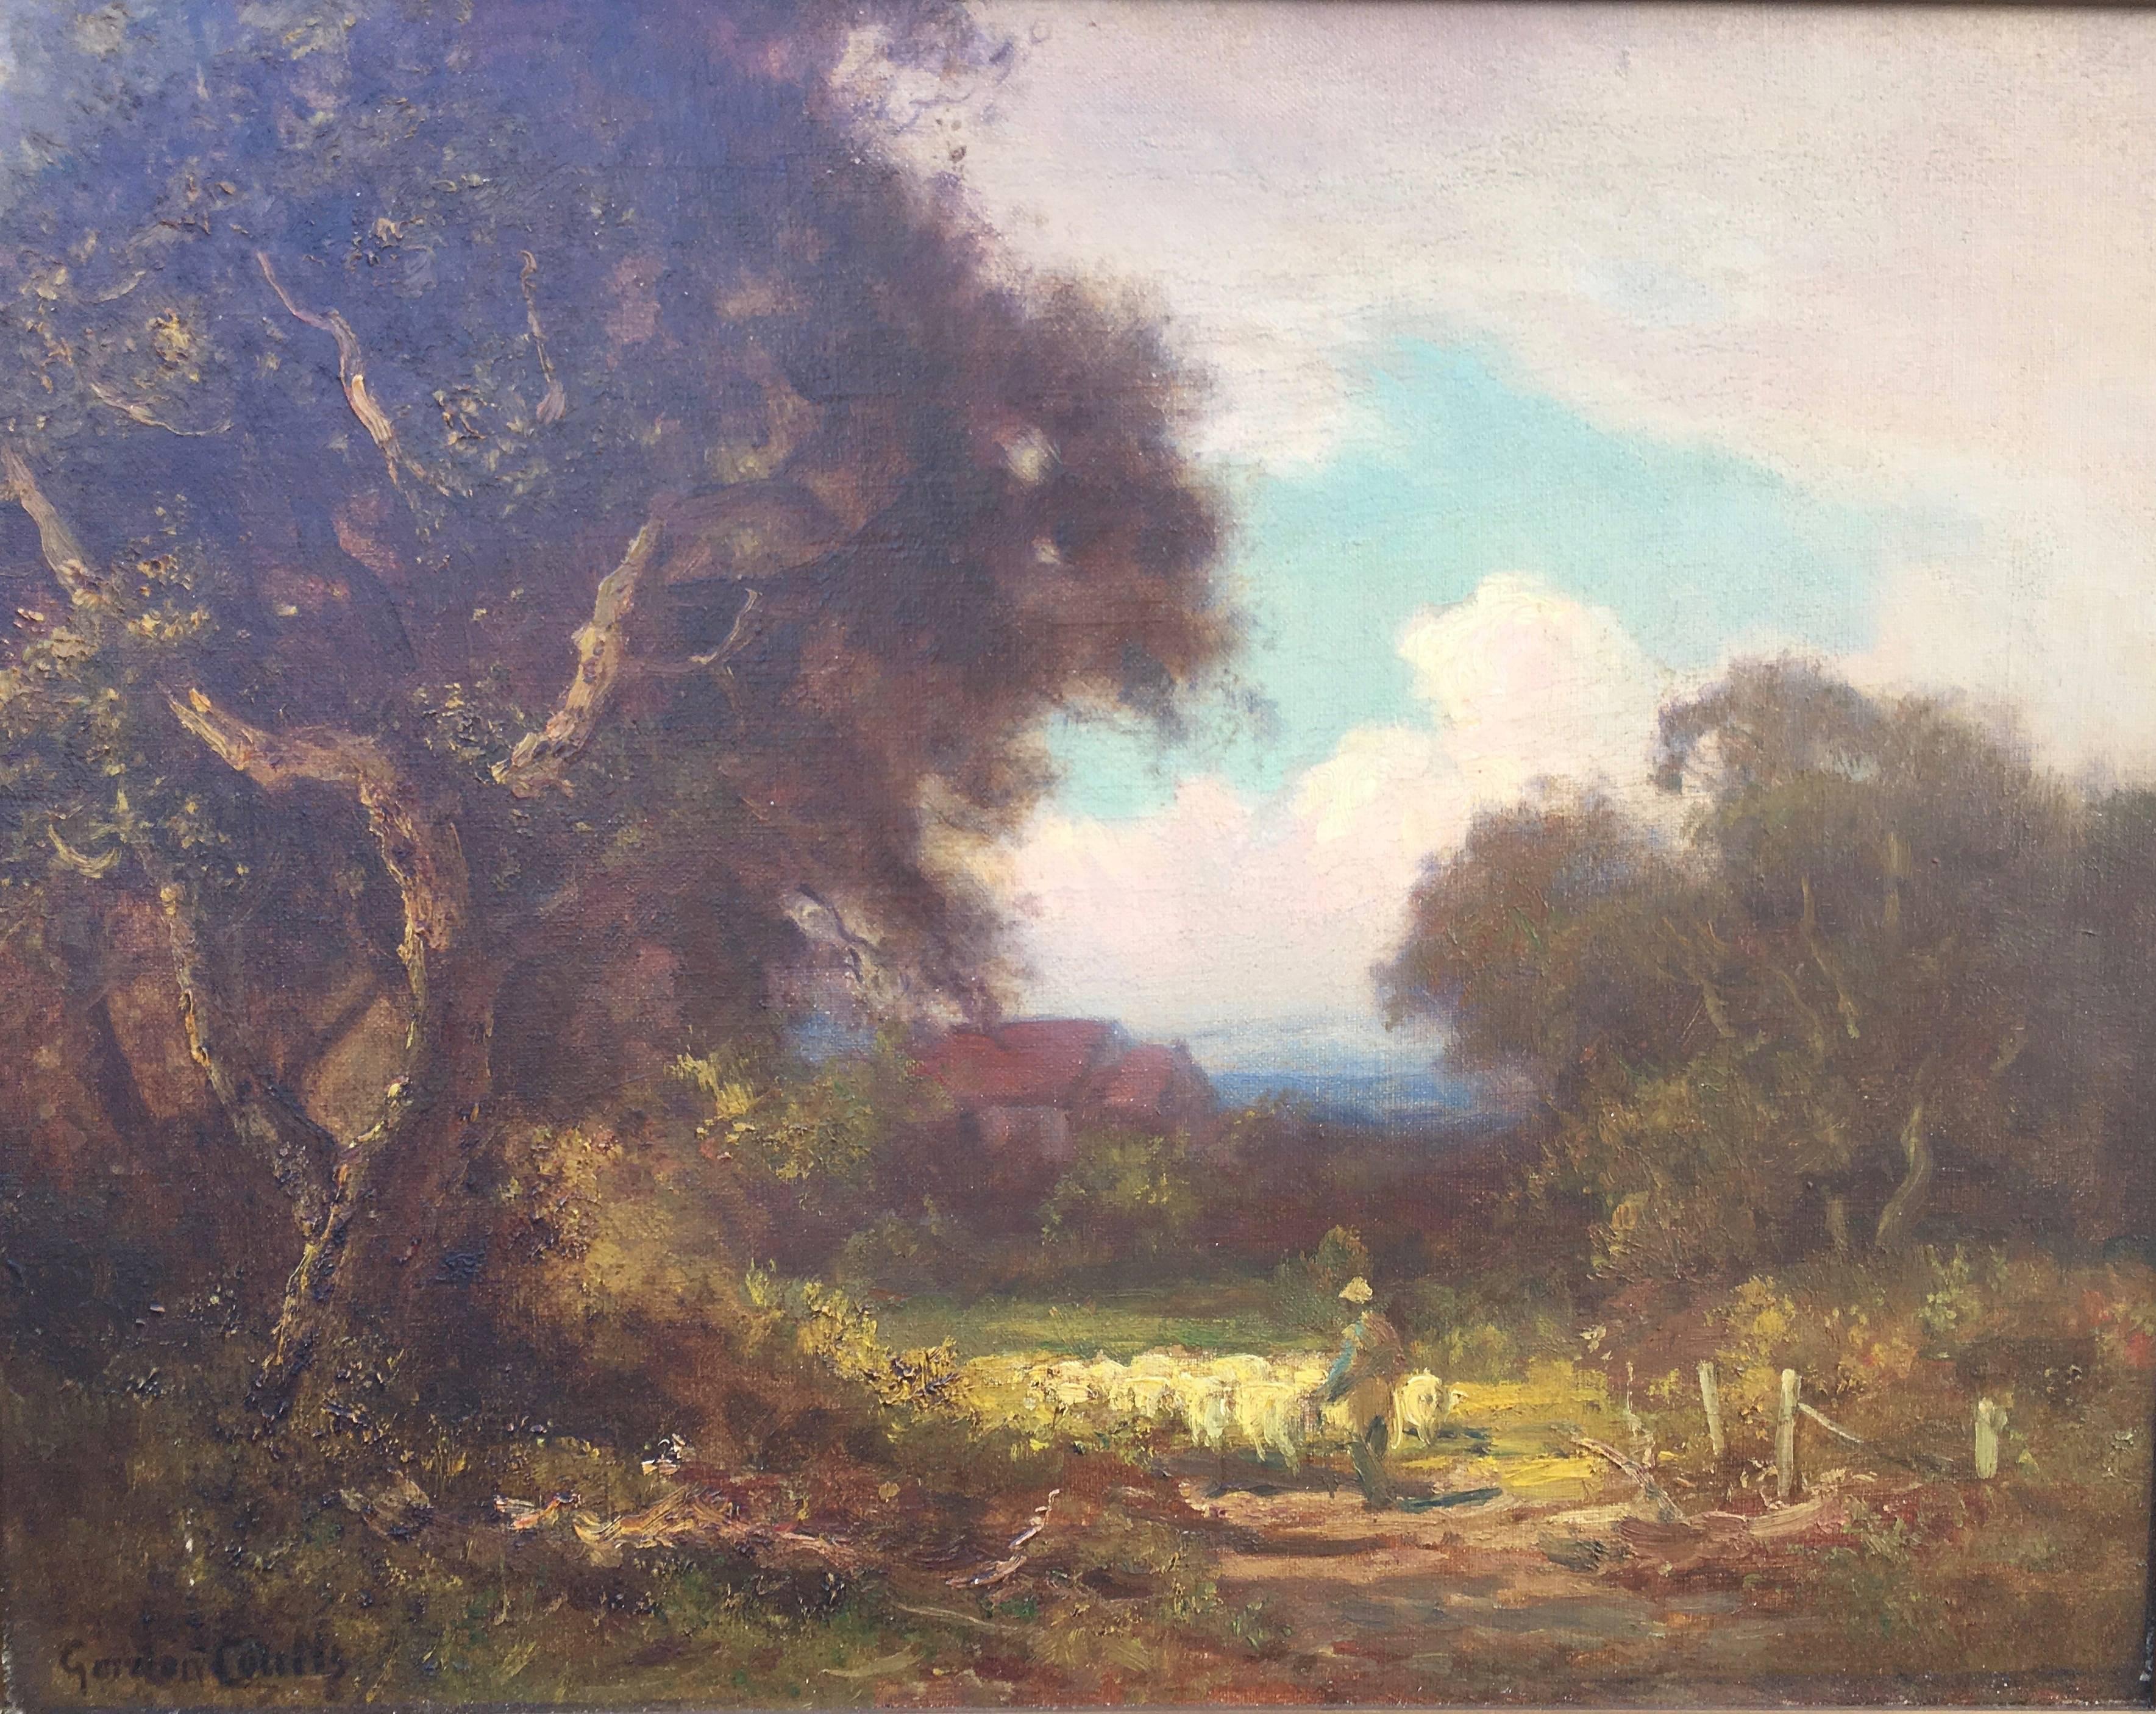 Gordon Coutts Landscape Painting - Shepherd Herding His Sheep Towards Home Through the Trees 